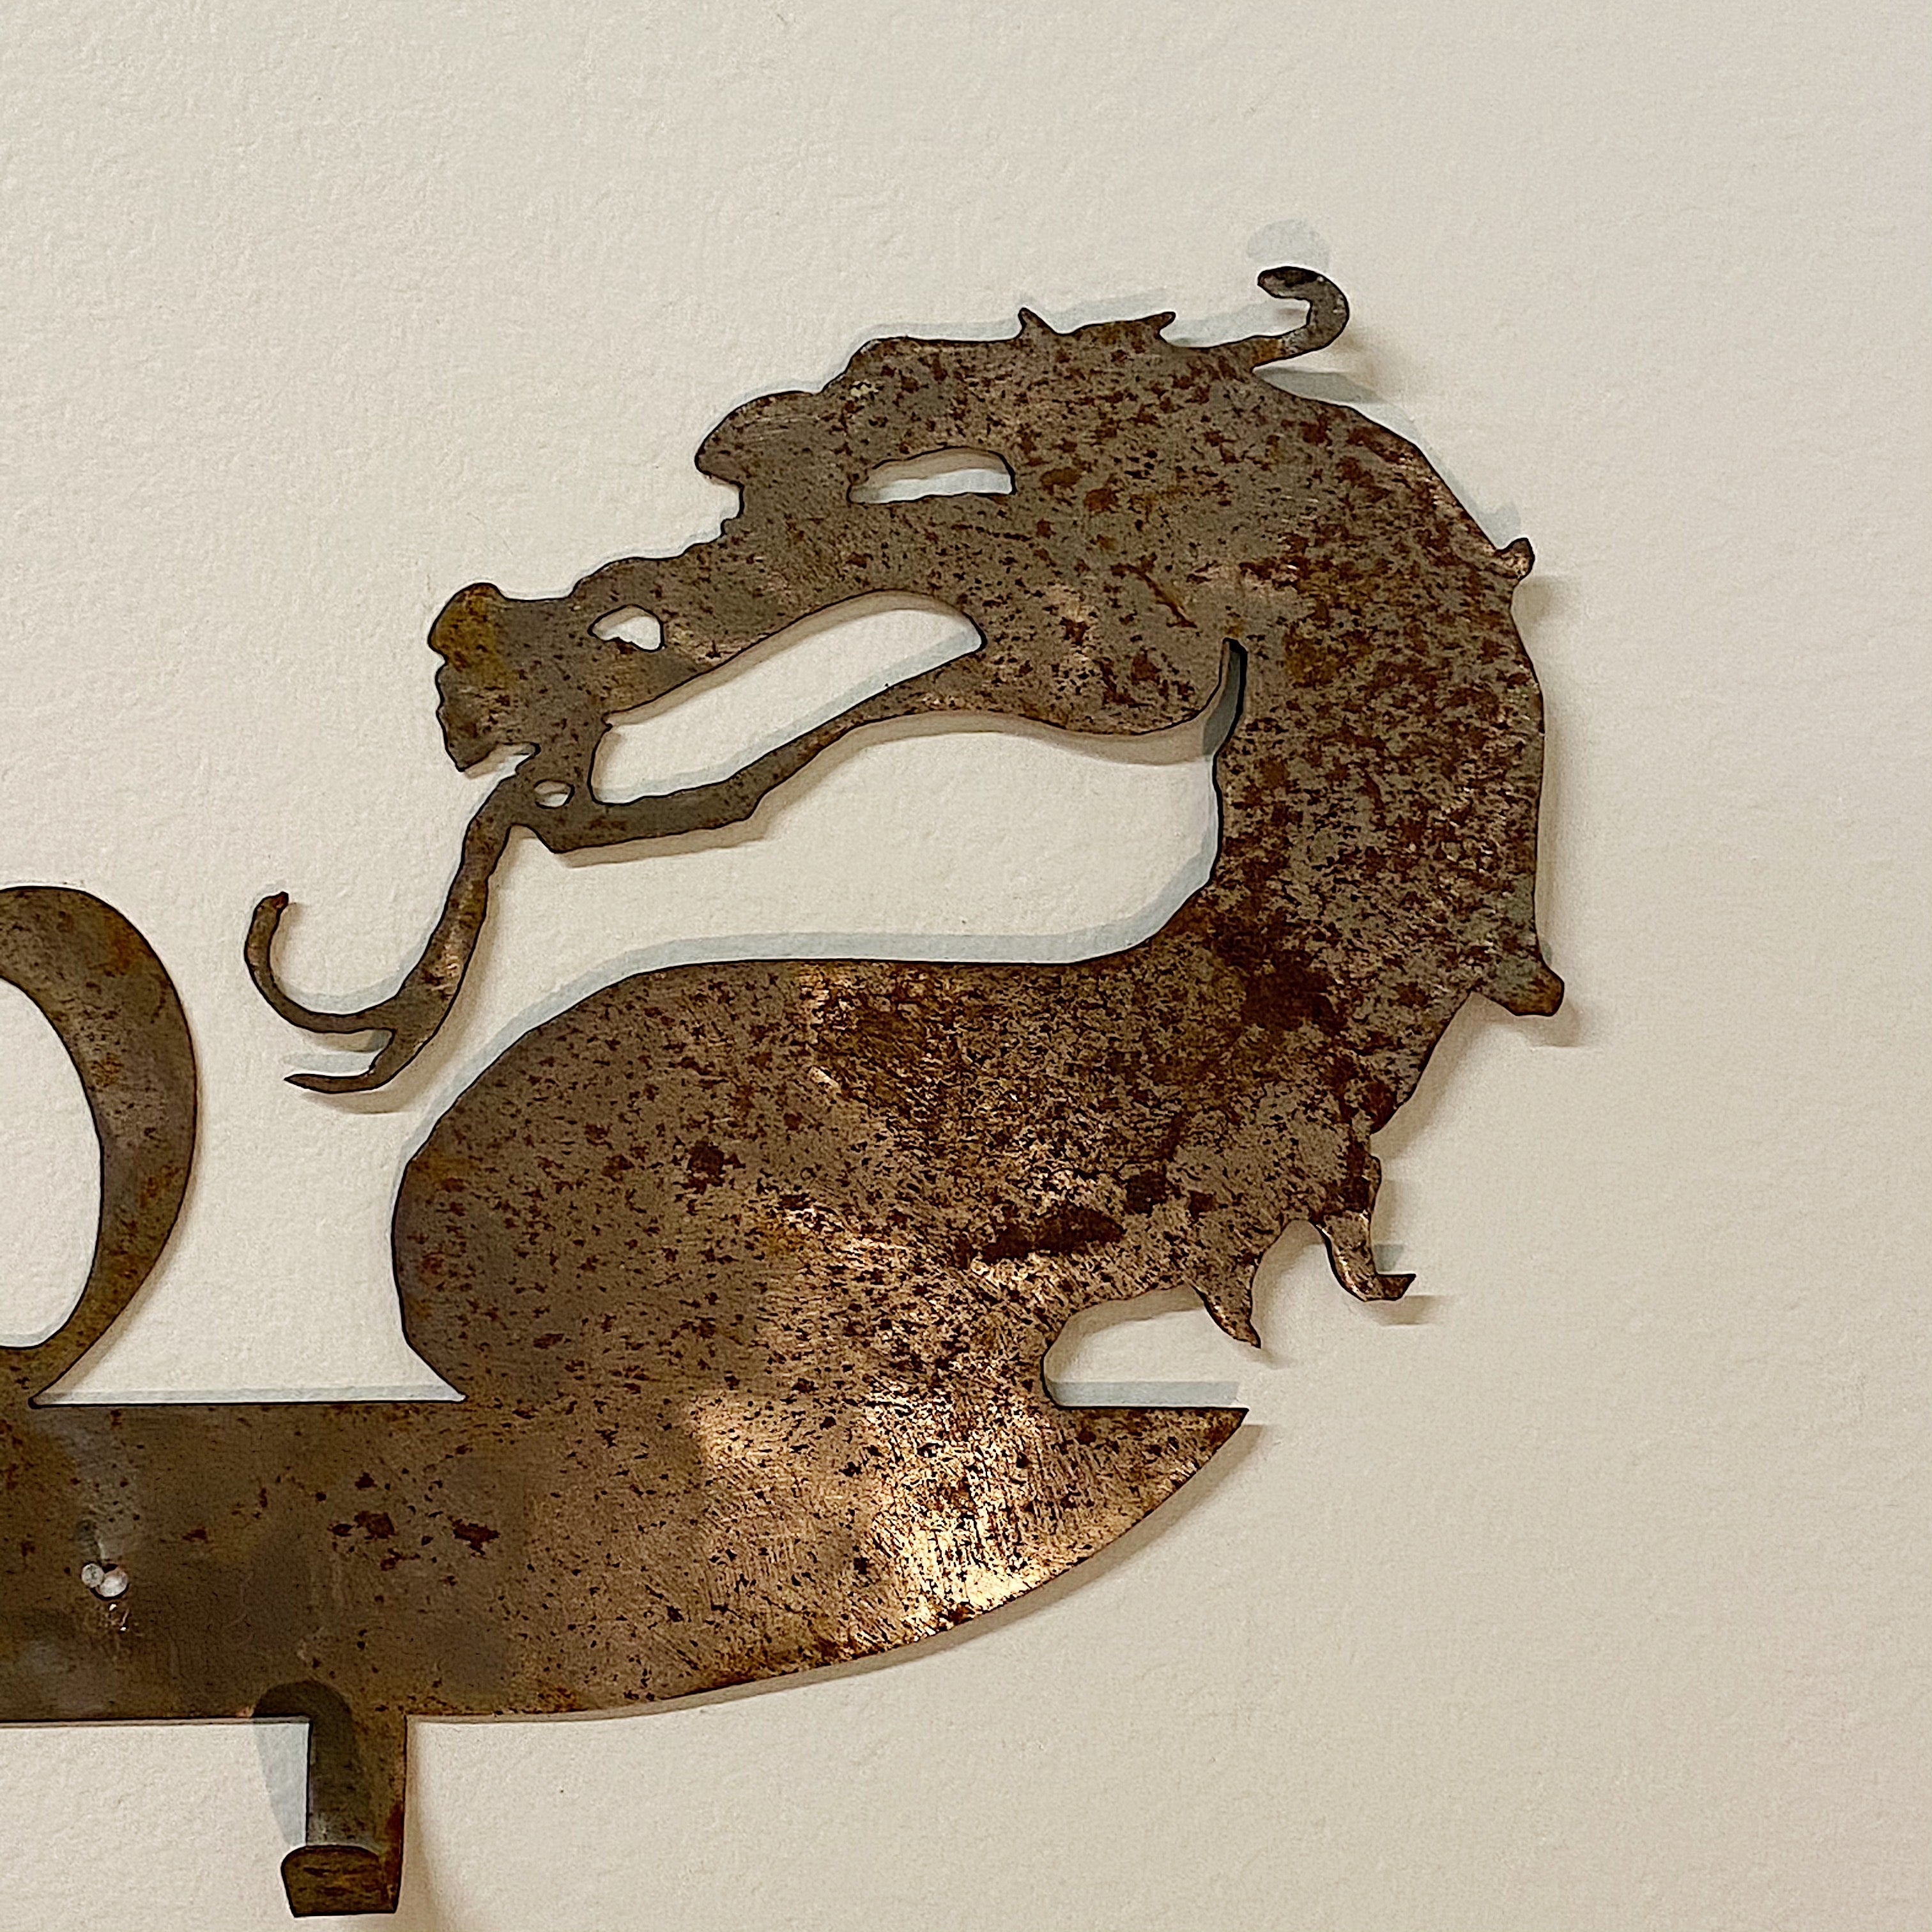 Dragon head from Vintage Tae kwon do Sign with Dragons Hooks Rust - 1980s Sheet Metal Artwork - Cobra Kai - Martial Arts Wall Deco - Cool Hanger- Rare Signs